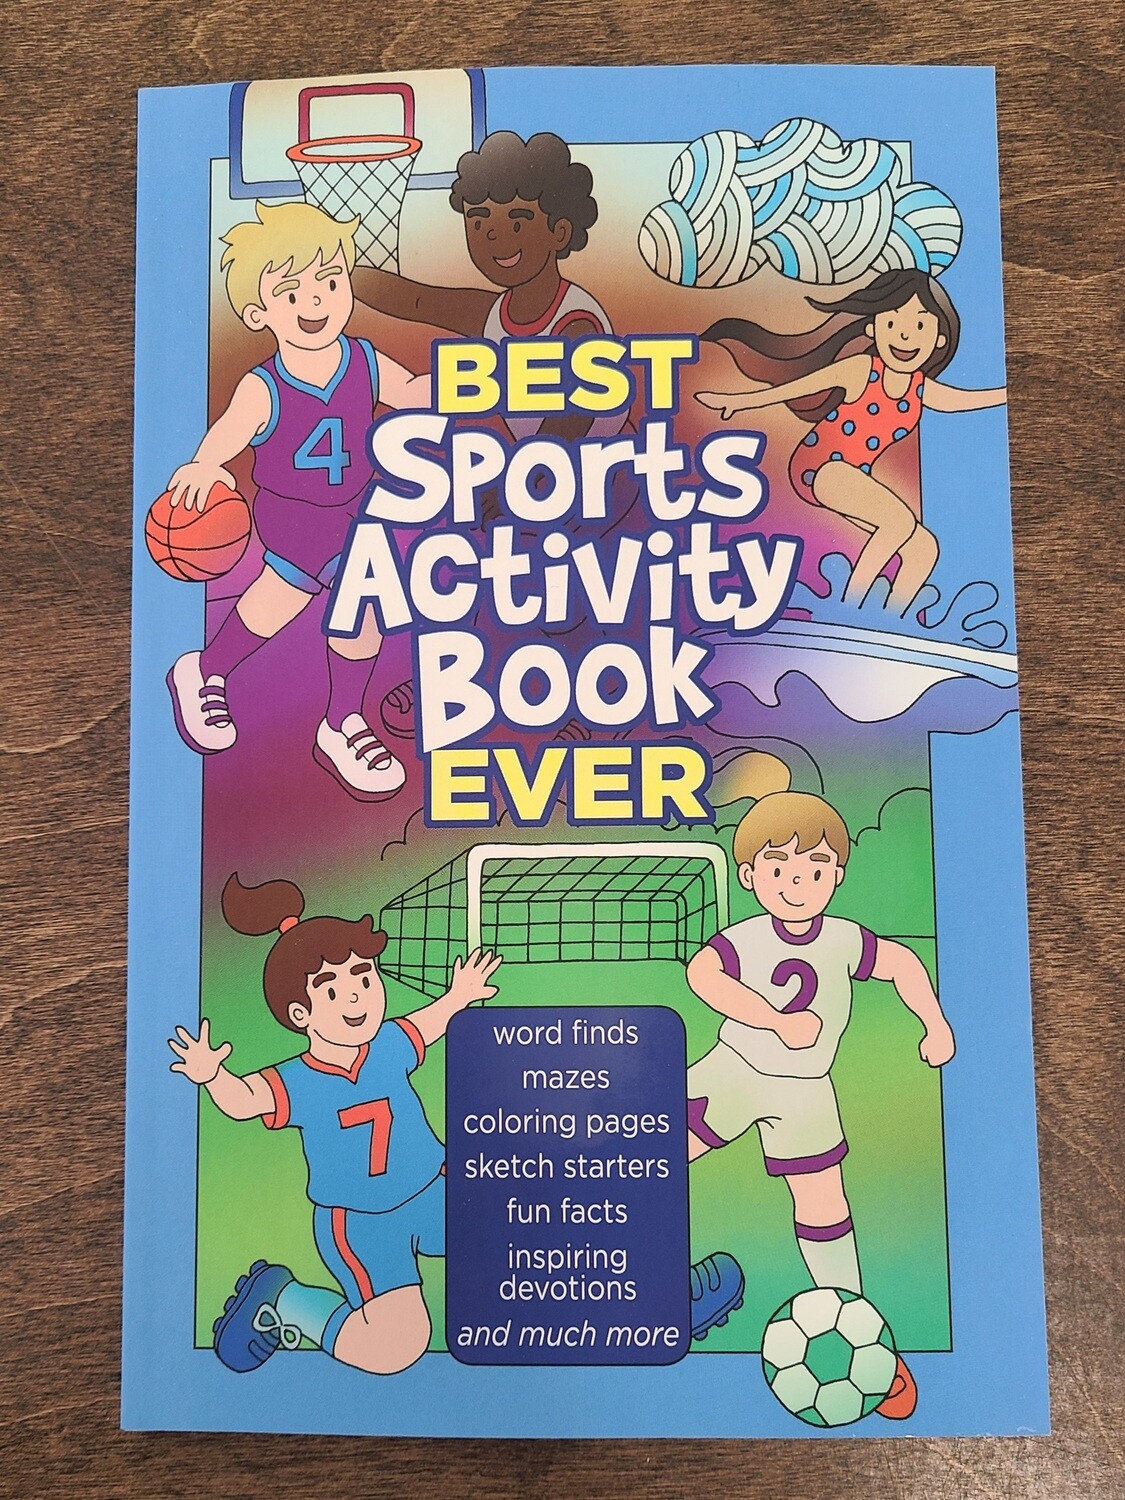 Best Sports Activity Book Ever by Chris Garborg